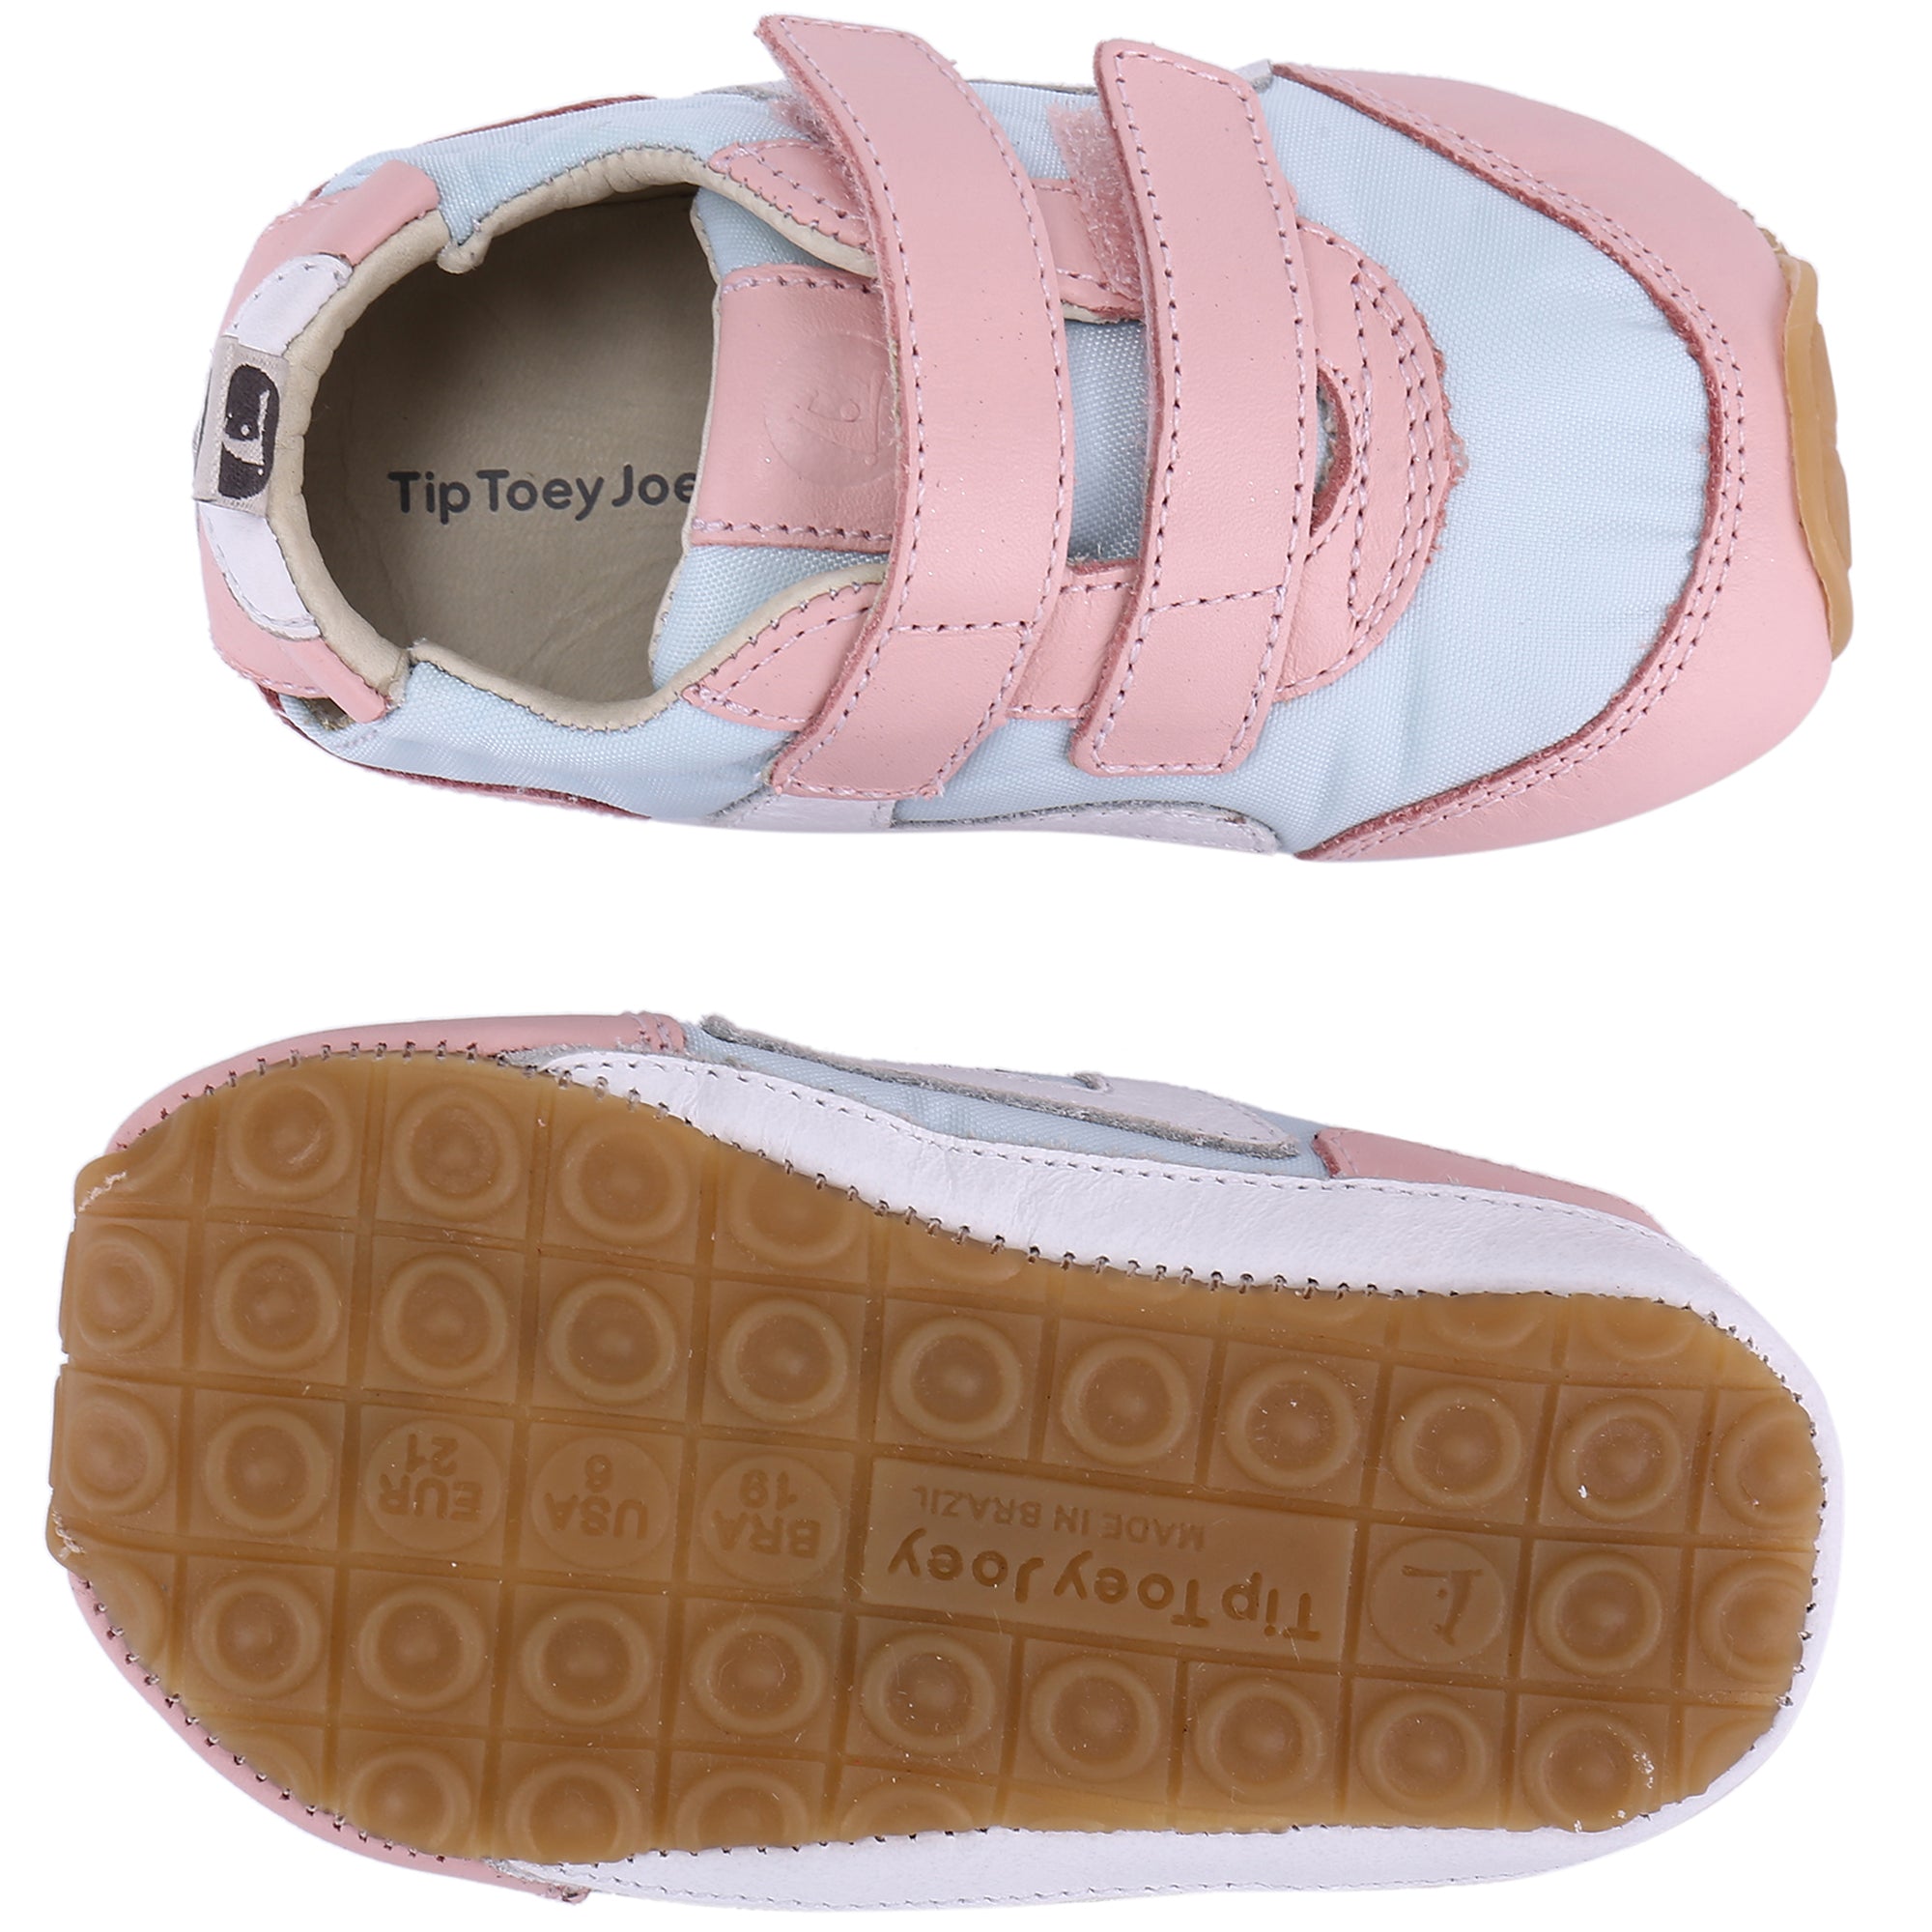 Baby Girls Pink & Blue Leather Shoes